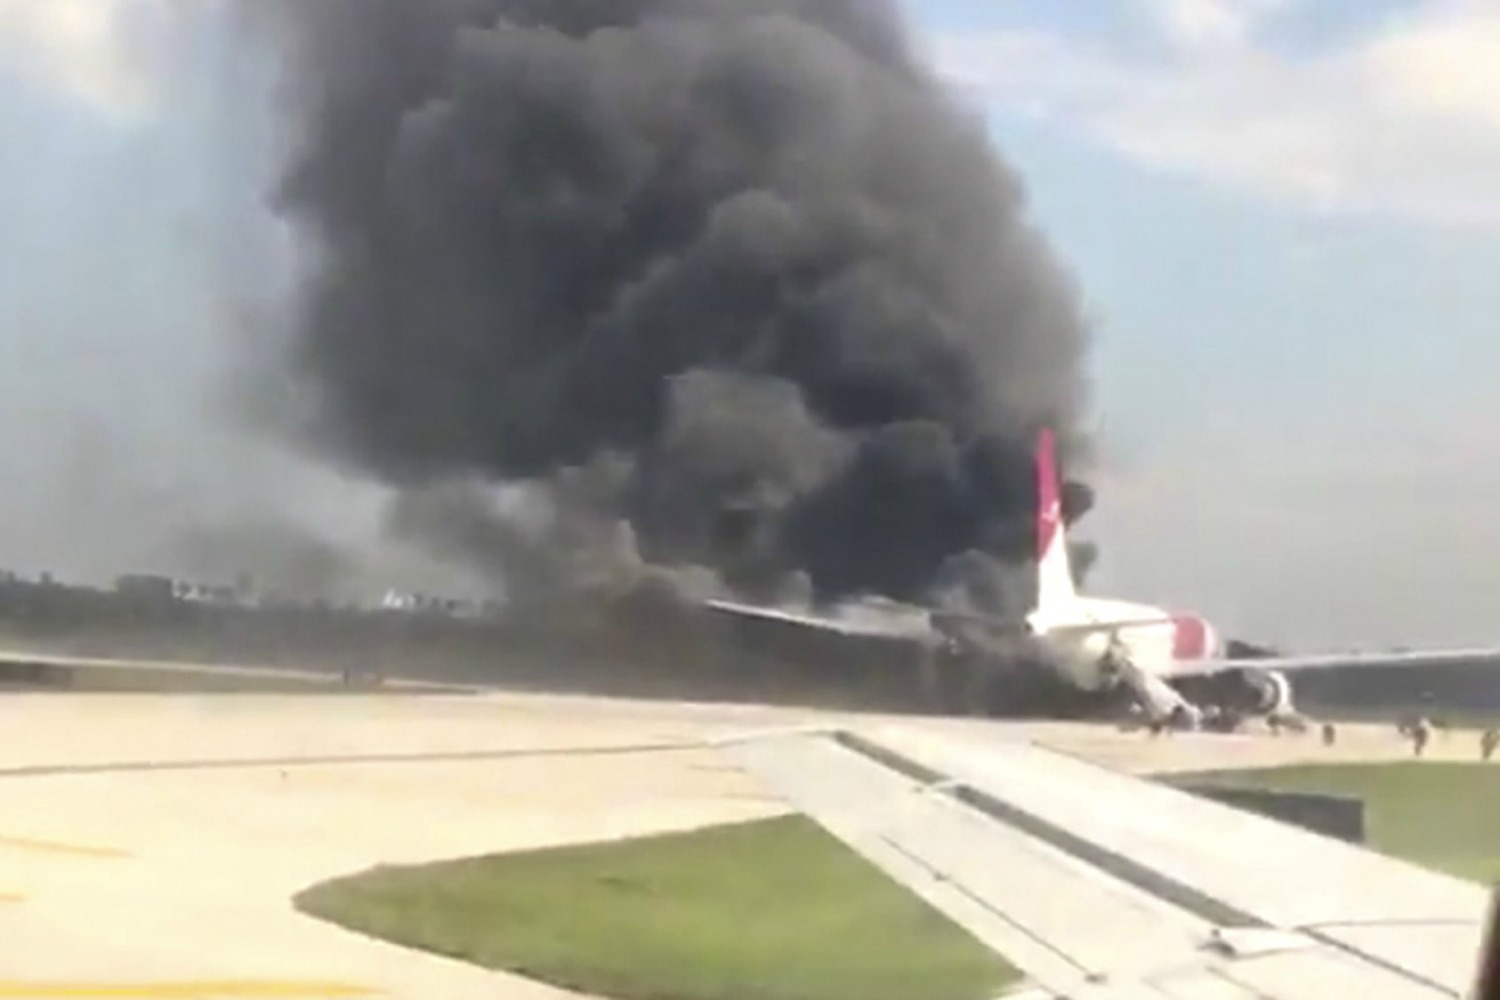 7 hurt after airplane traveling from Florida to Venezuela catches fire